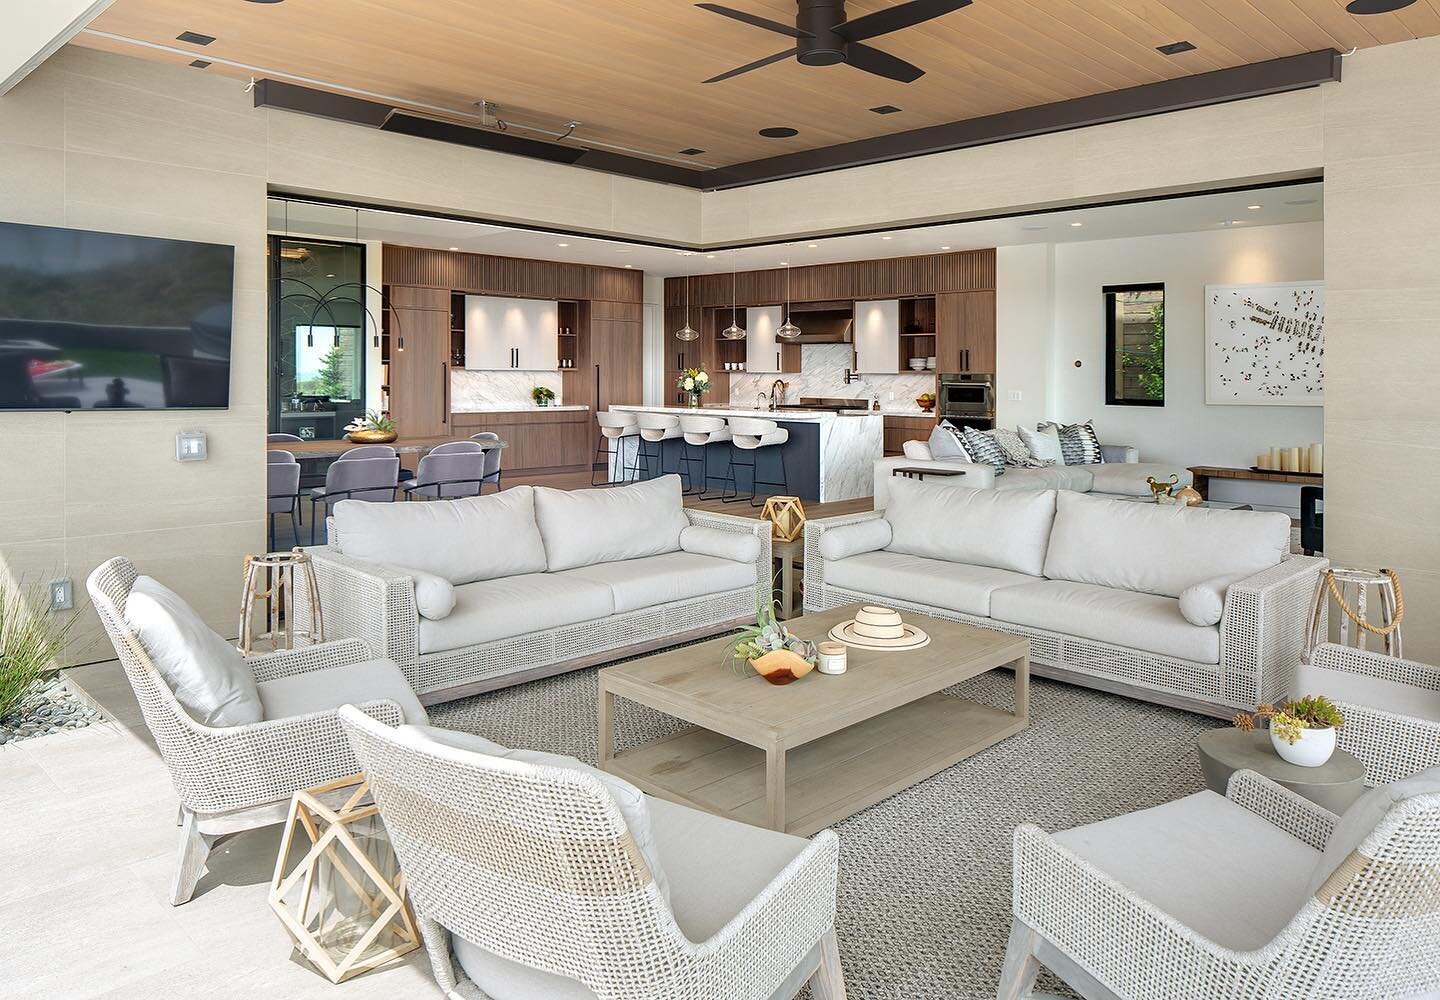 Blending the indoor/outdoor spaces for Cali living #modern #newconstruction #interiors #home #caliliving #lajolla